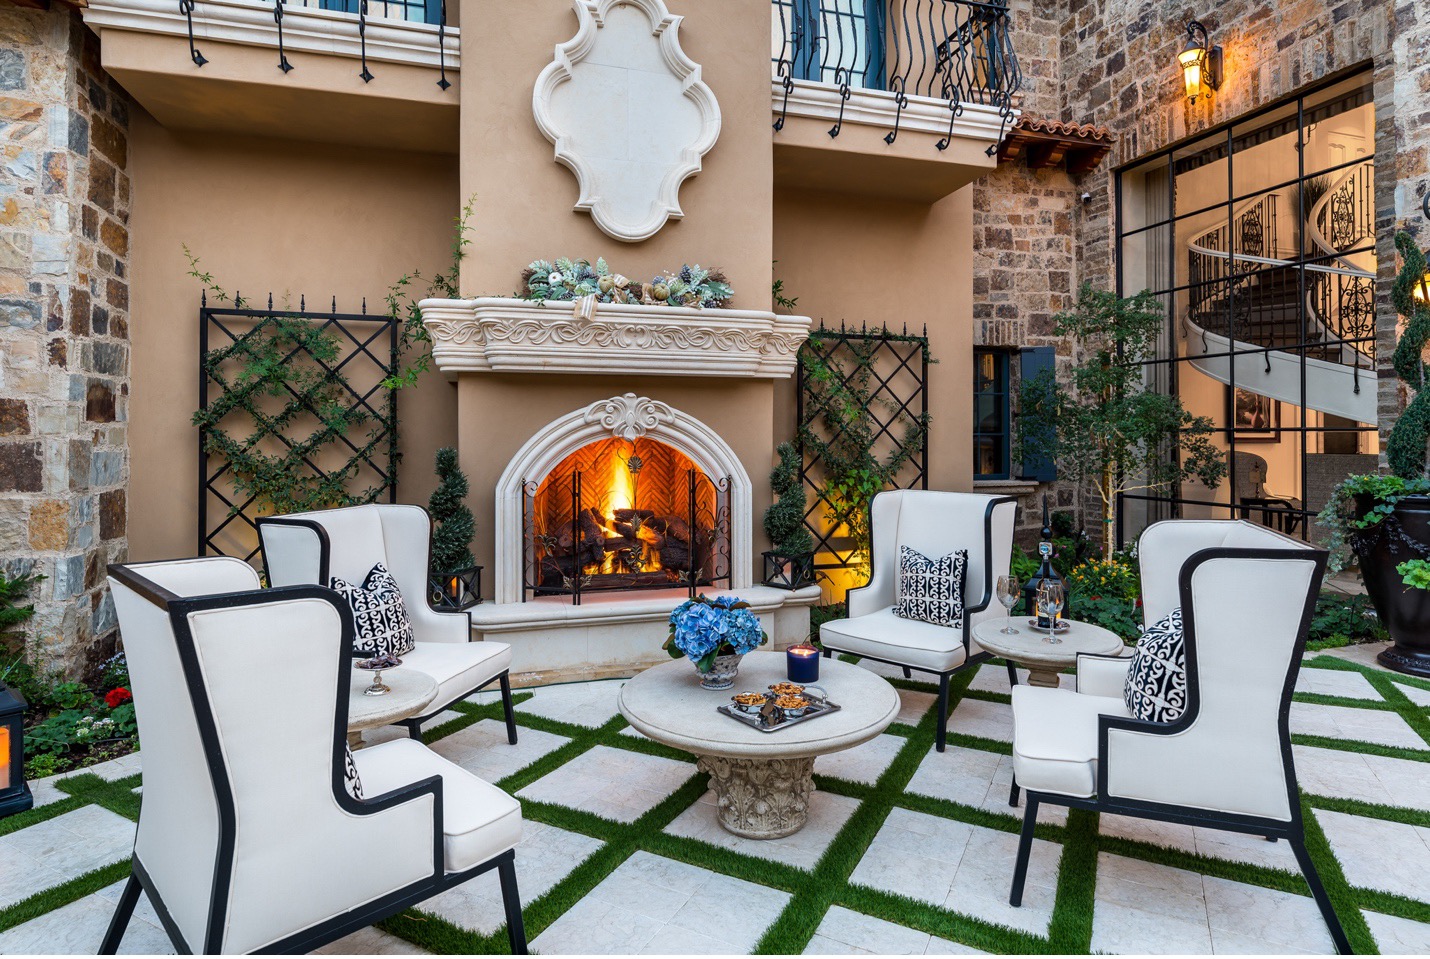 Outdoor living space by the fire in Scottsdale, Arizona